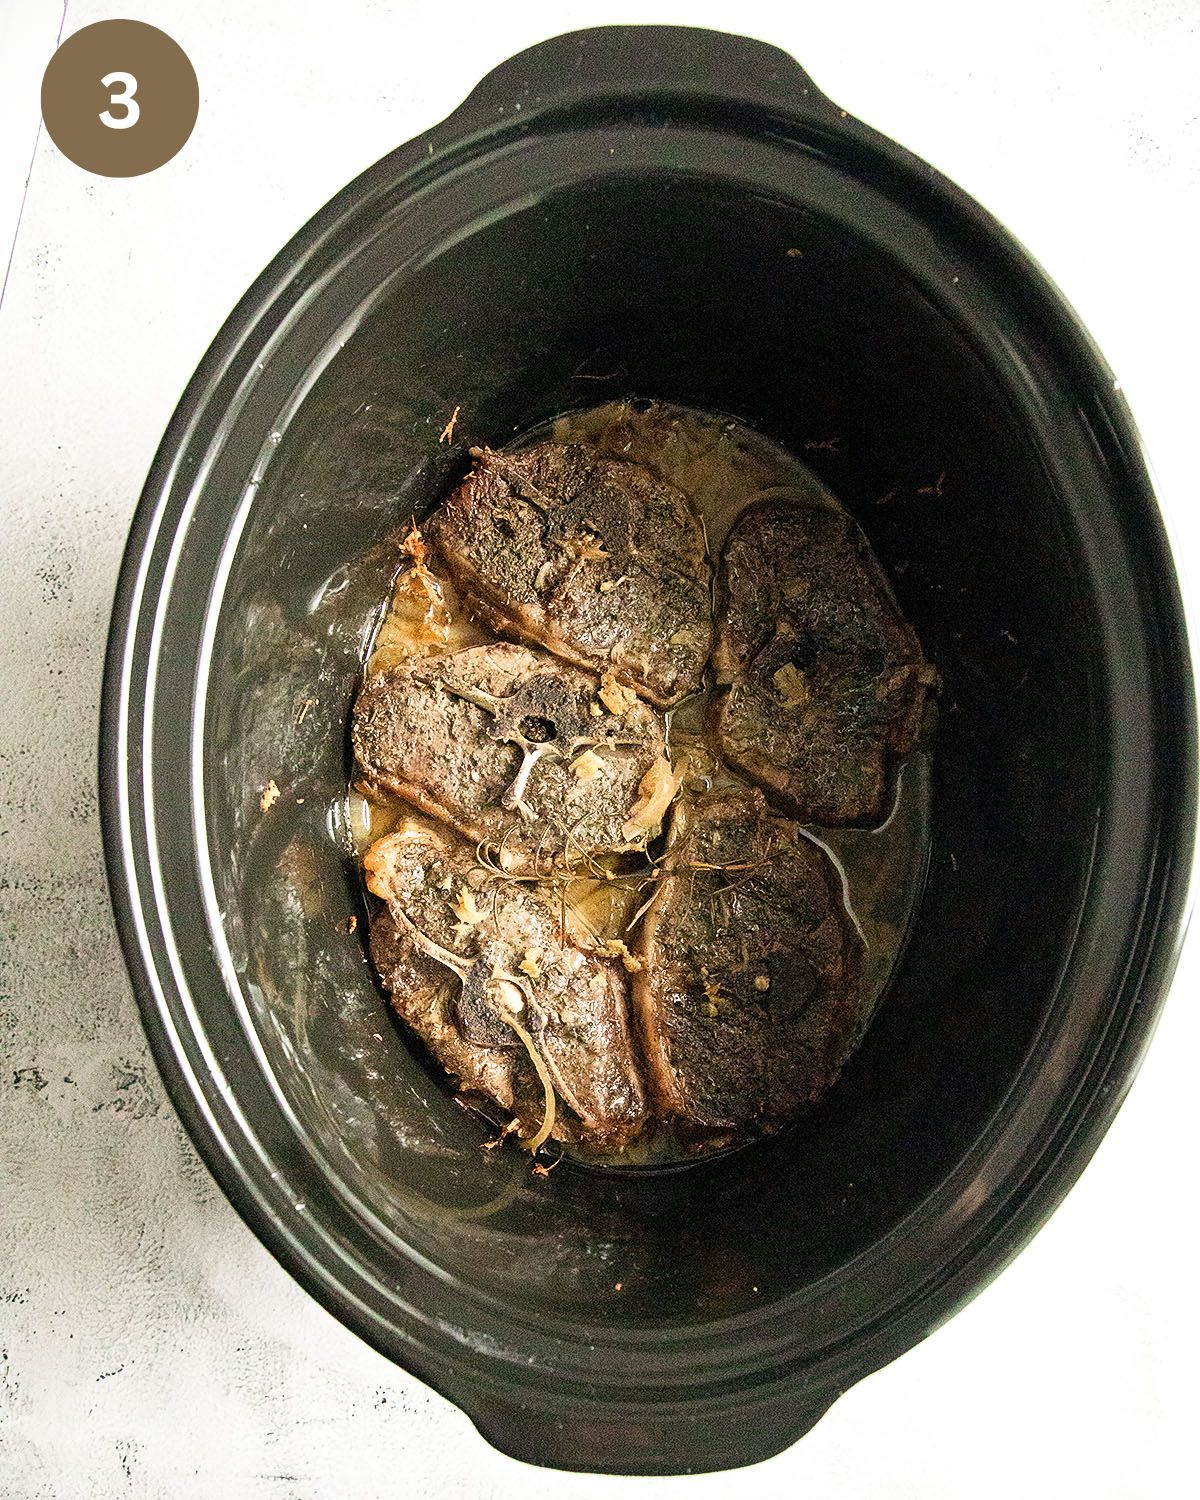 lamb chops in the pot of a slow cooker or crockpot.